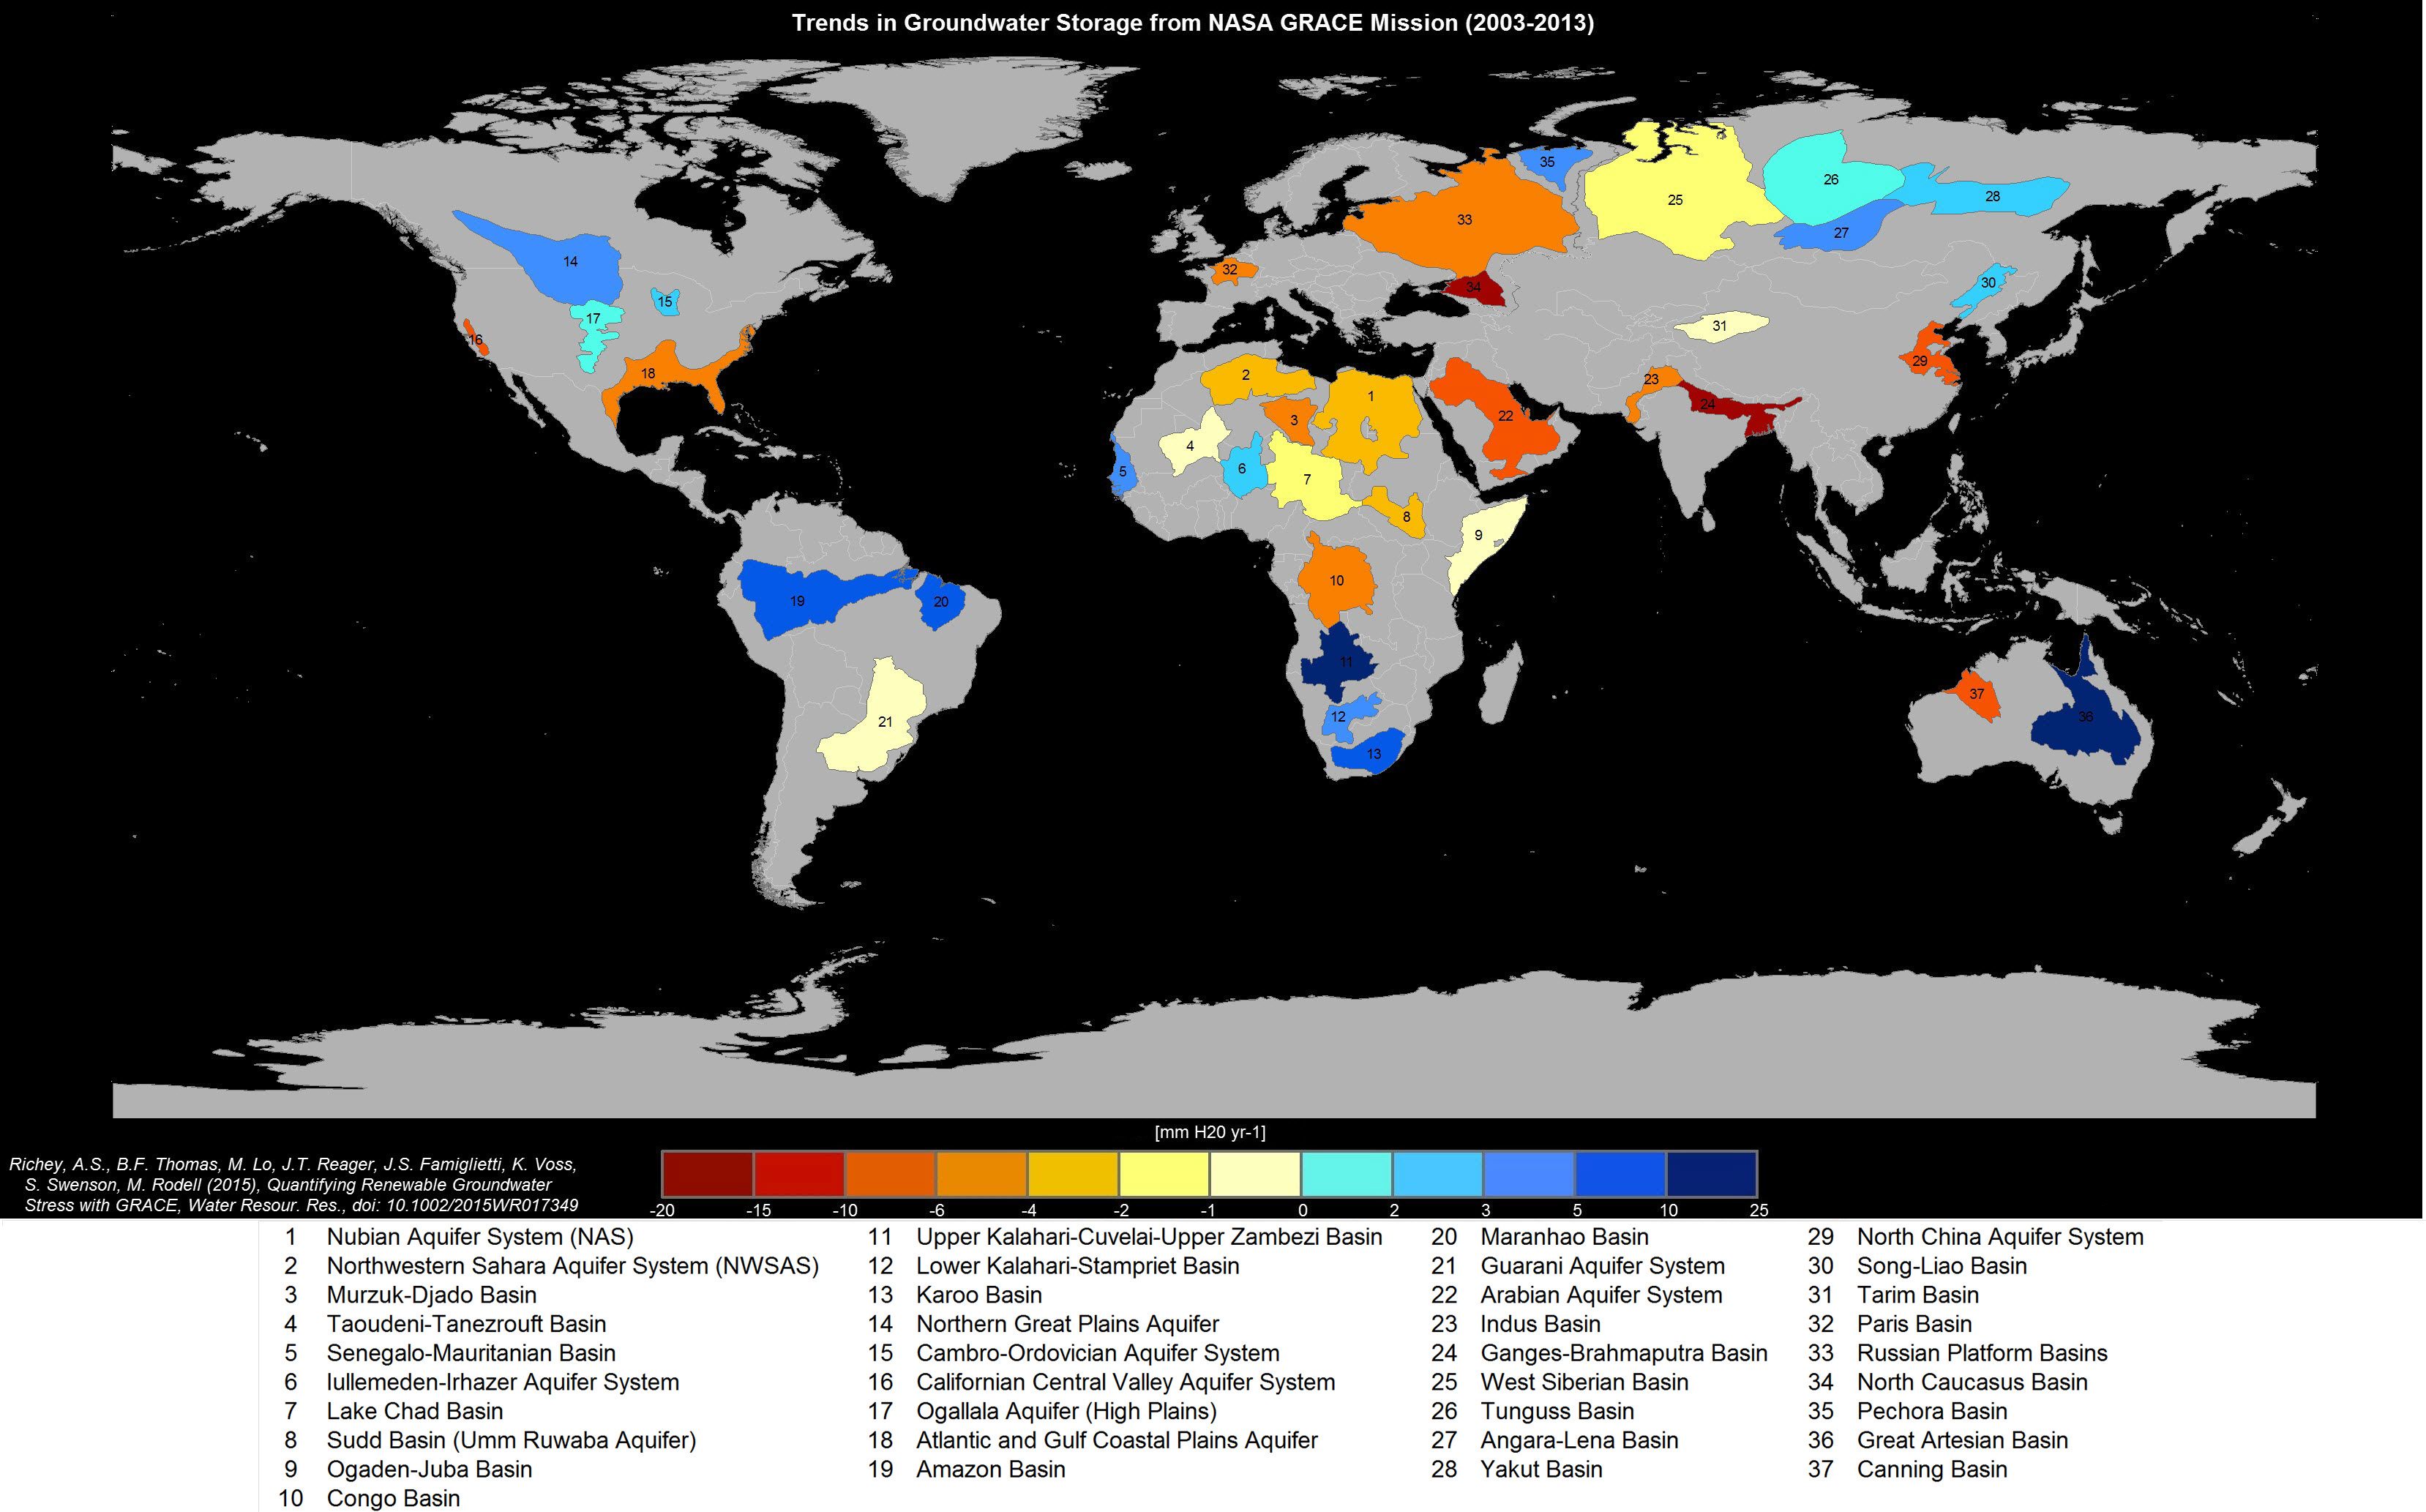 World's Largest Groundwater Basins in Distress